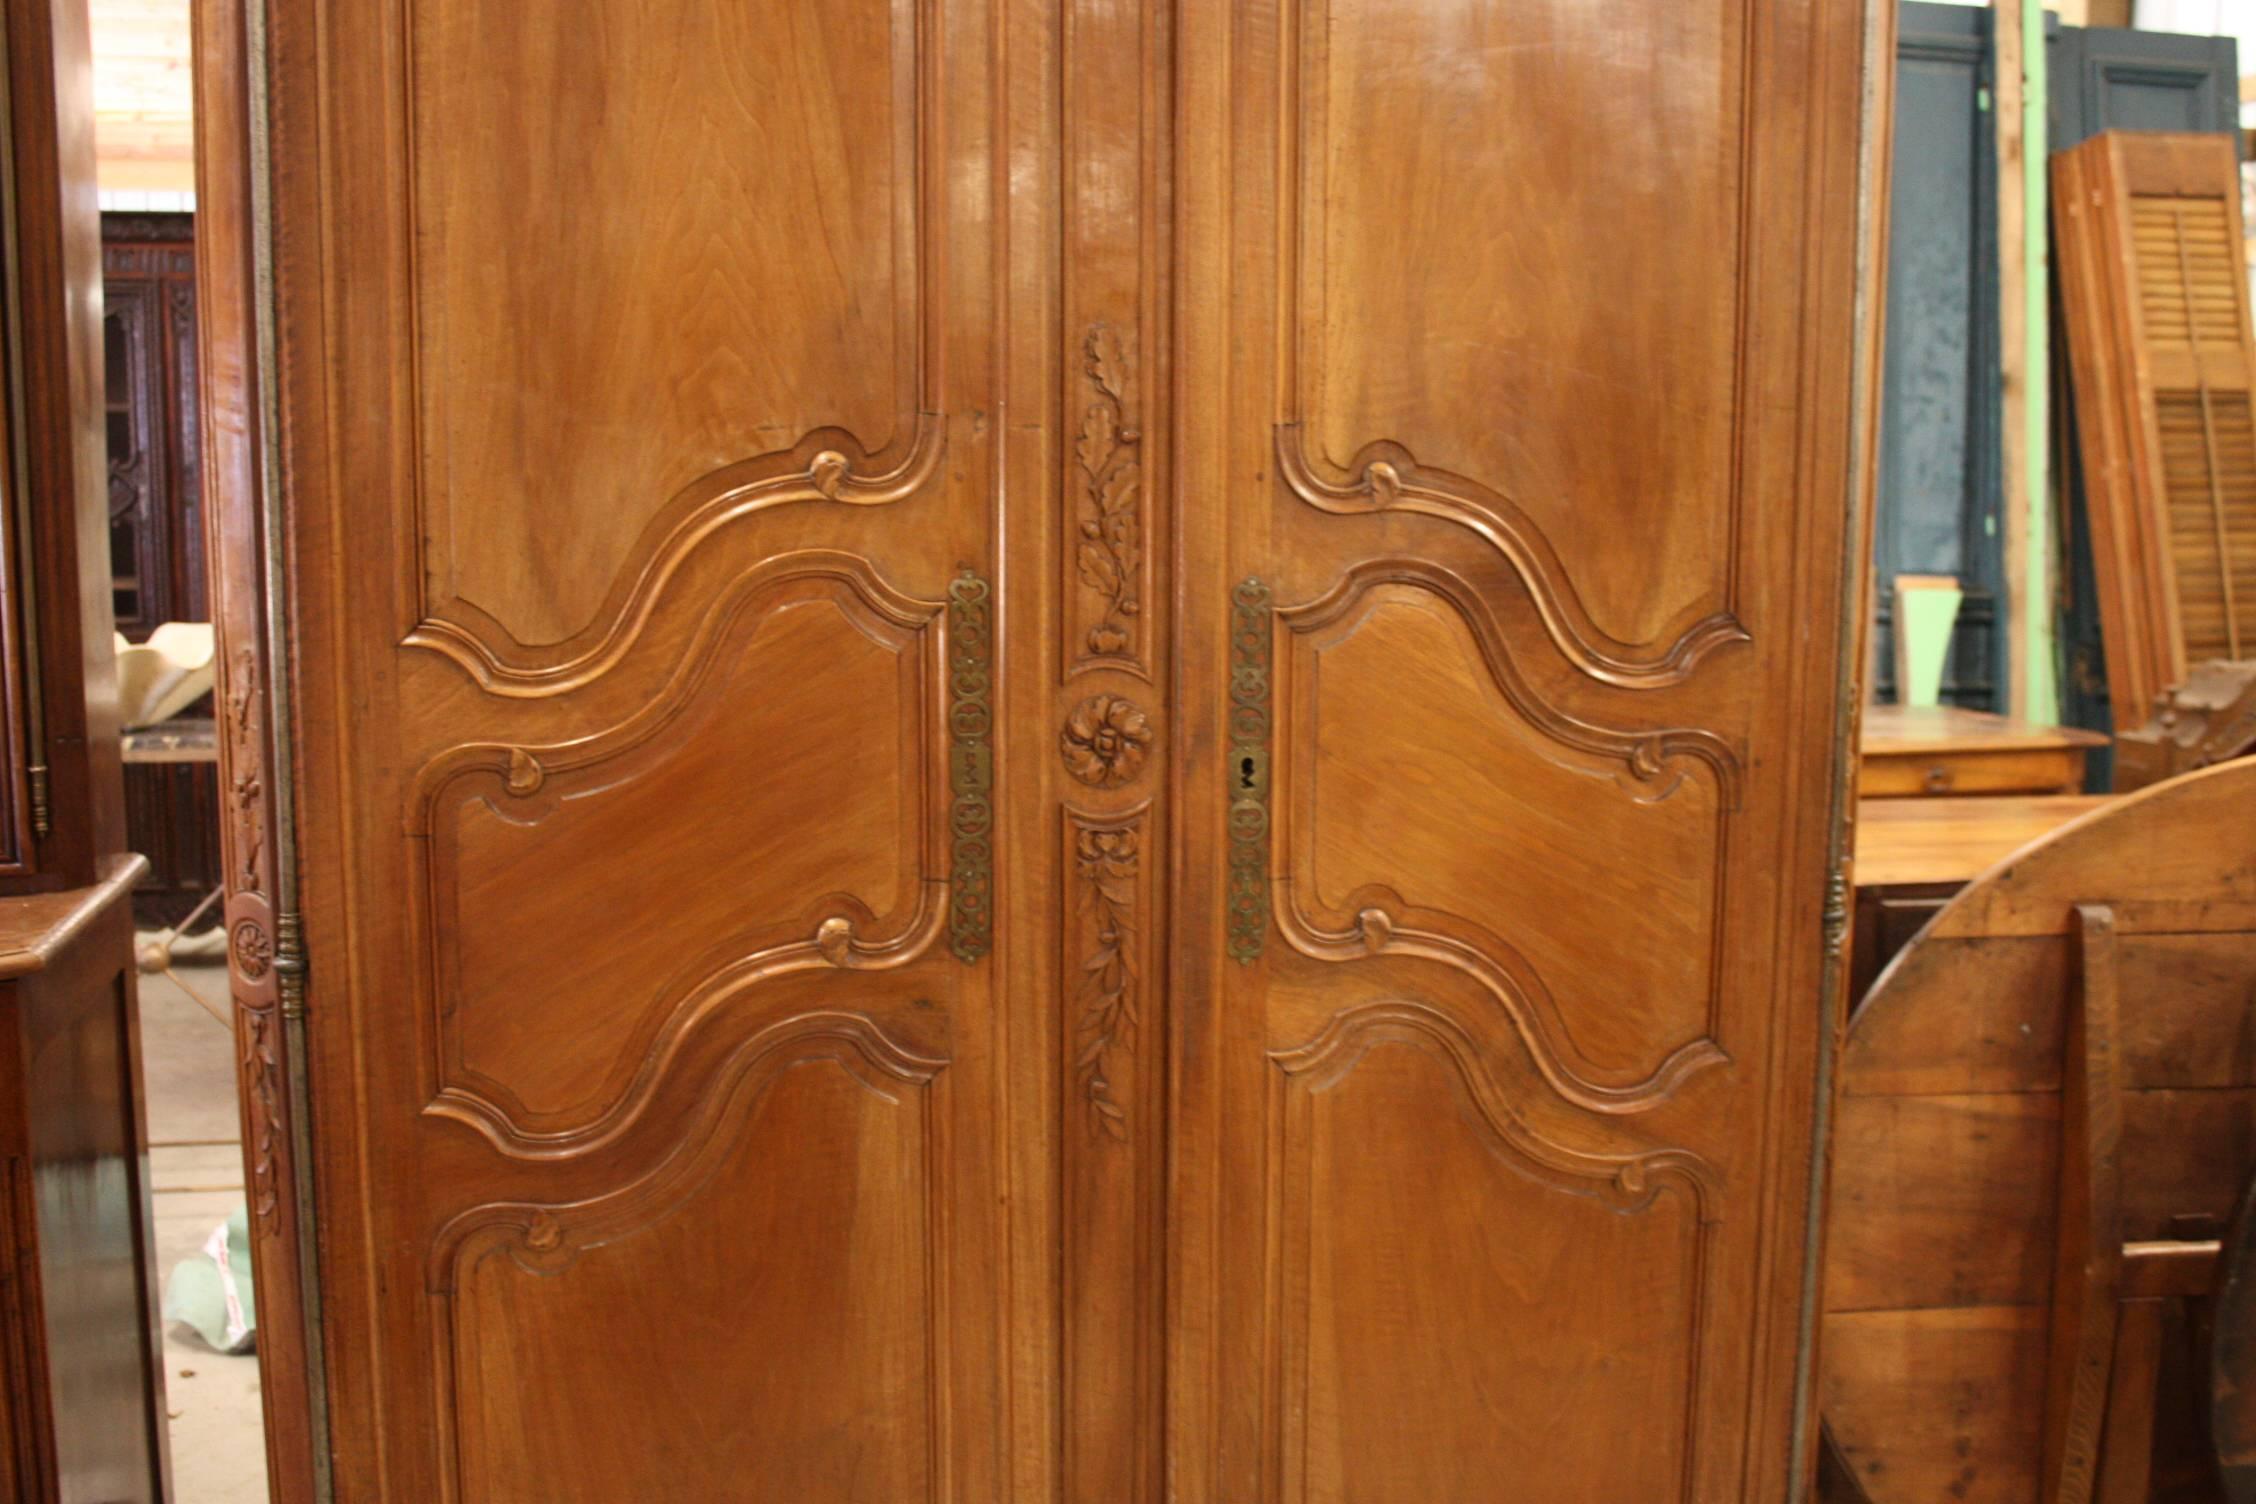 A beautiful armoire in French cherry from the period of Louis XV, who ruled France from 1715-1774. A perfect example from the Lyon region of France. With scalloped apron and carved escargot feet, and original steel lock and hinges.